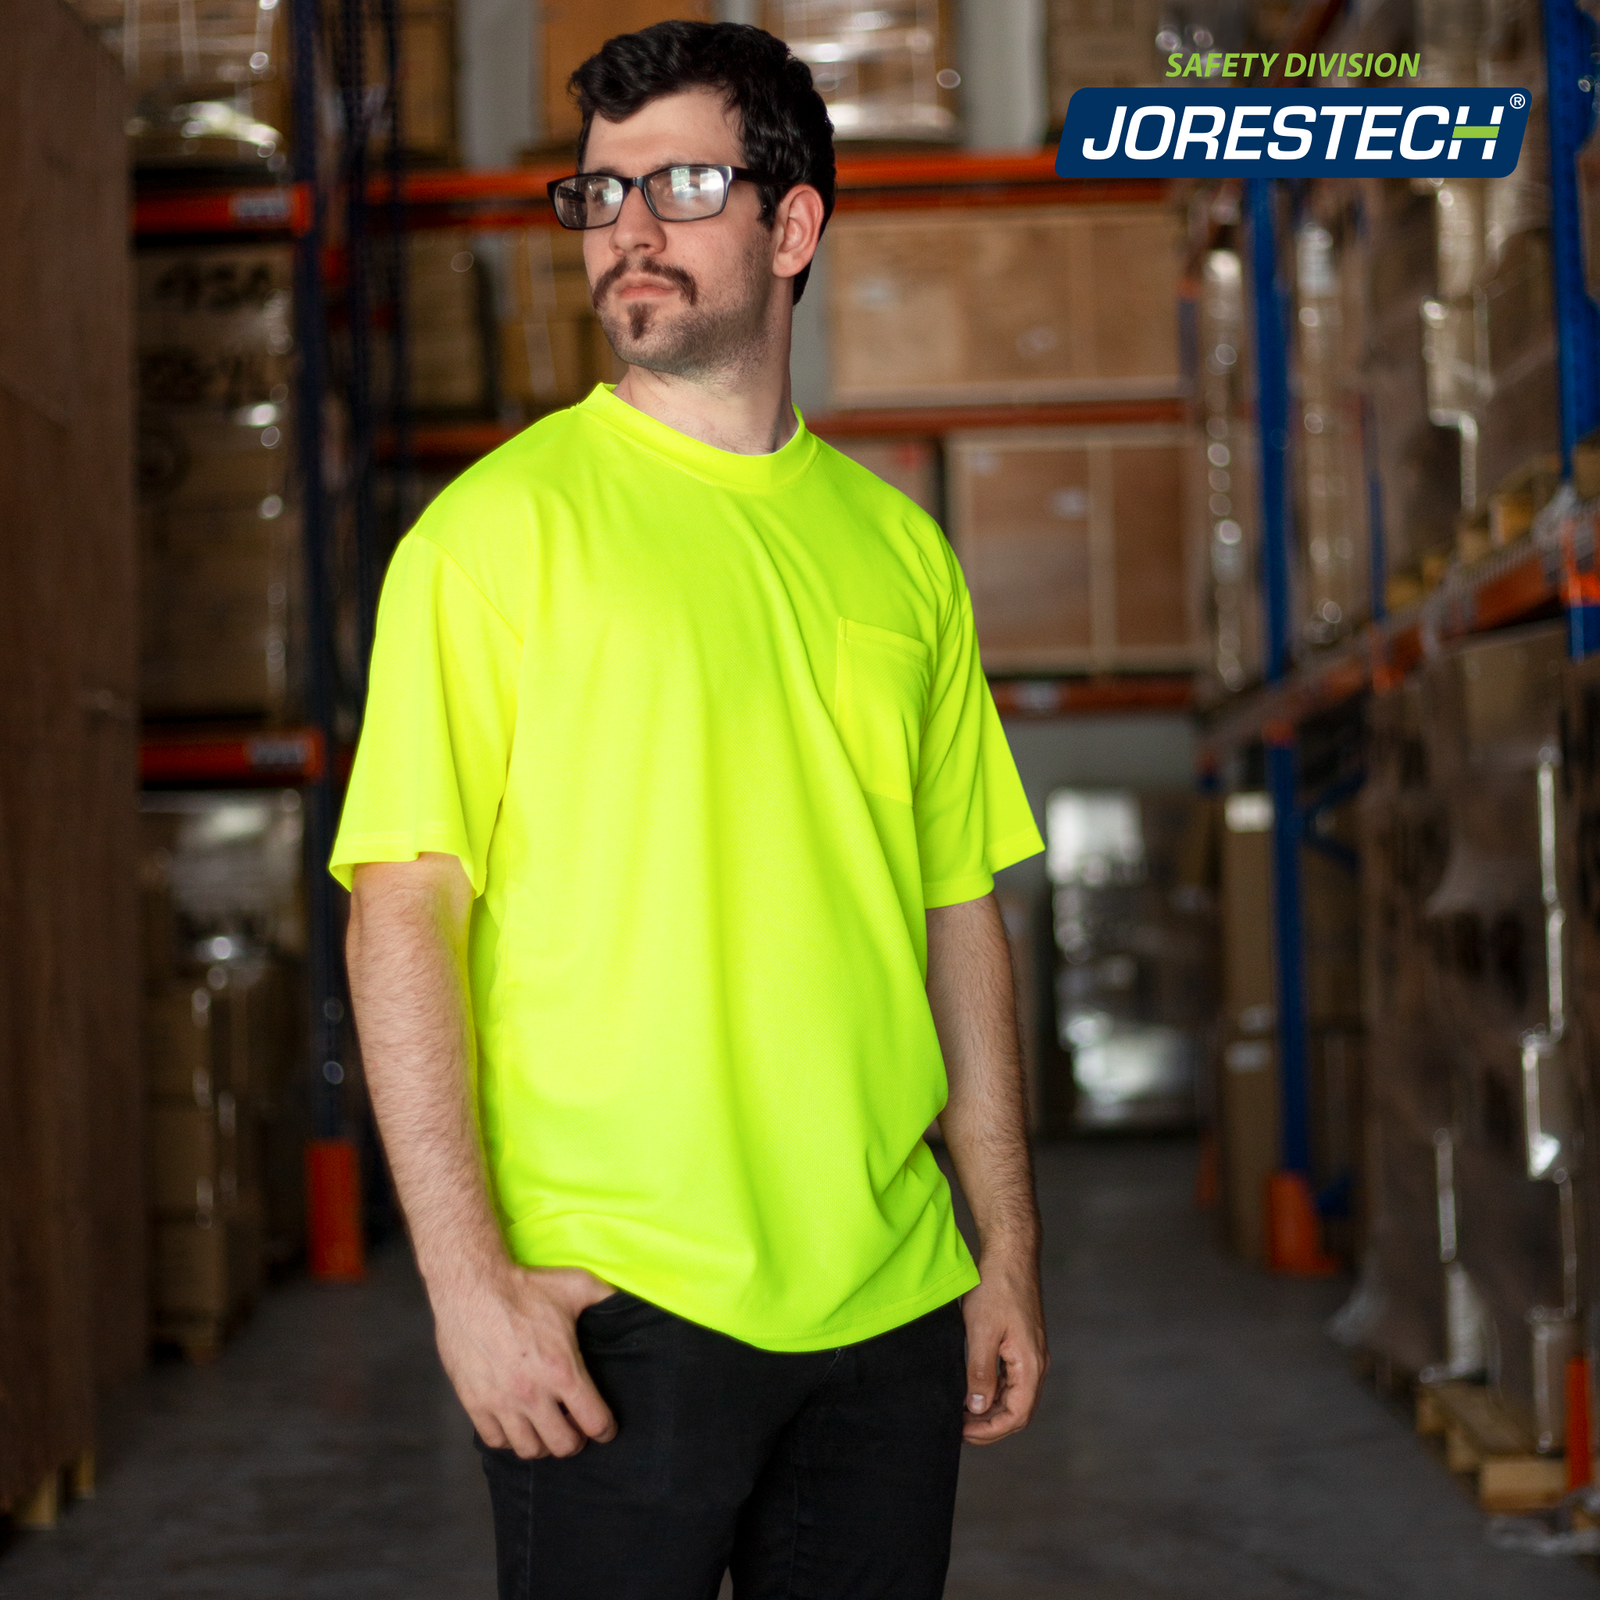 Man wearing the JORESTECH hi-vis Yellow/Lime safety shirt  inside a warehouse filled with brown boxes